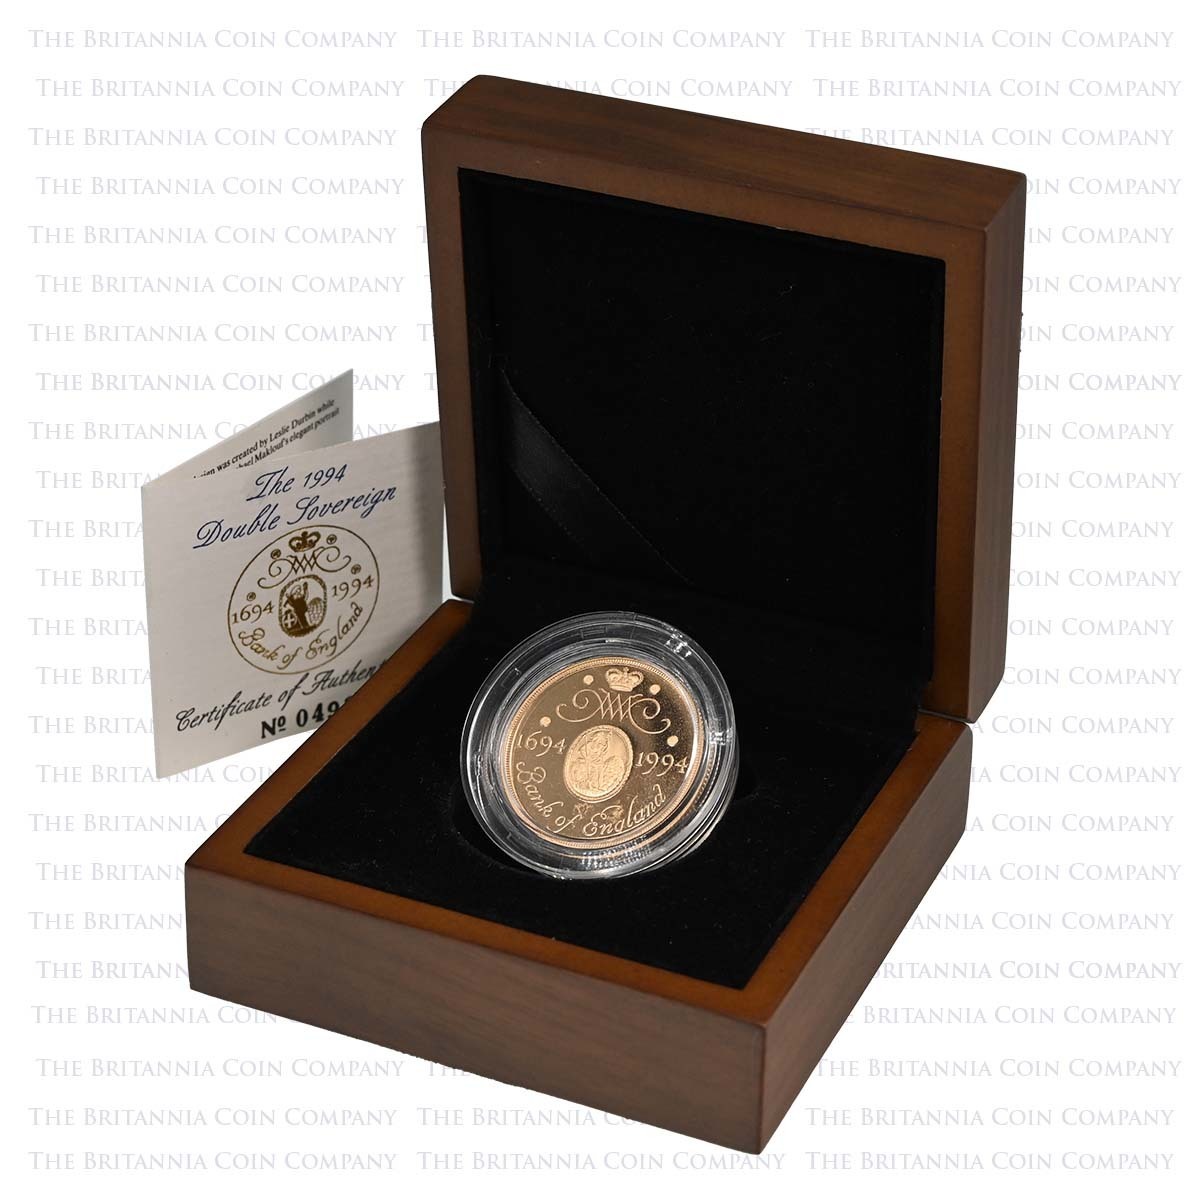 *An interesting outlier: The Royal Mint issued a gold Two Pound coin in 1994 to mark the 300th anniversary of the Bank of England. Spink lists this coin with other Two Pounds but the leaflet included in the box calls this a Double Sovereign. Photos show a